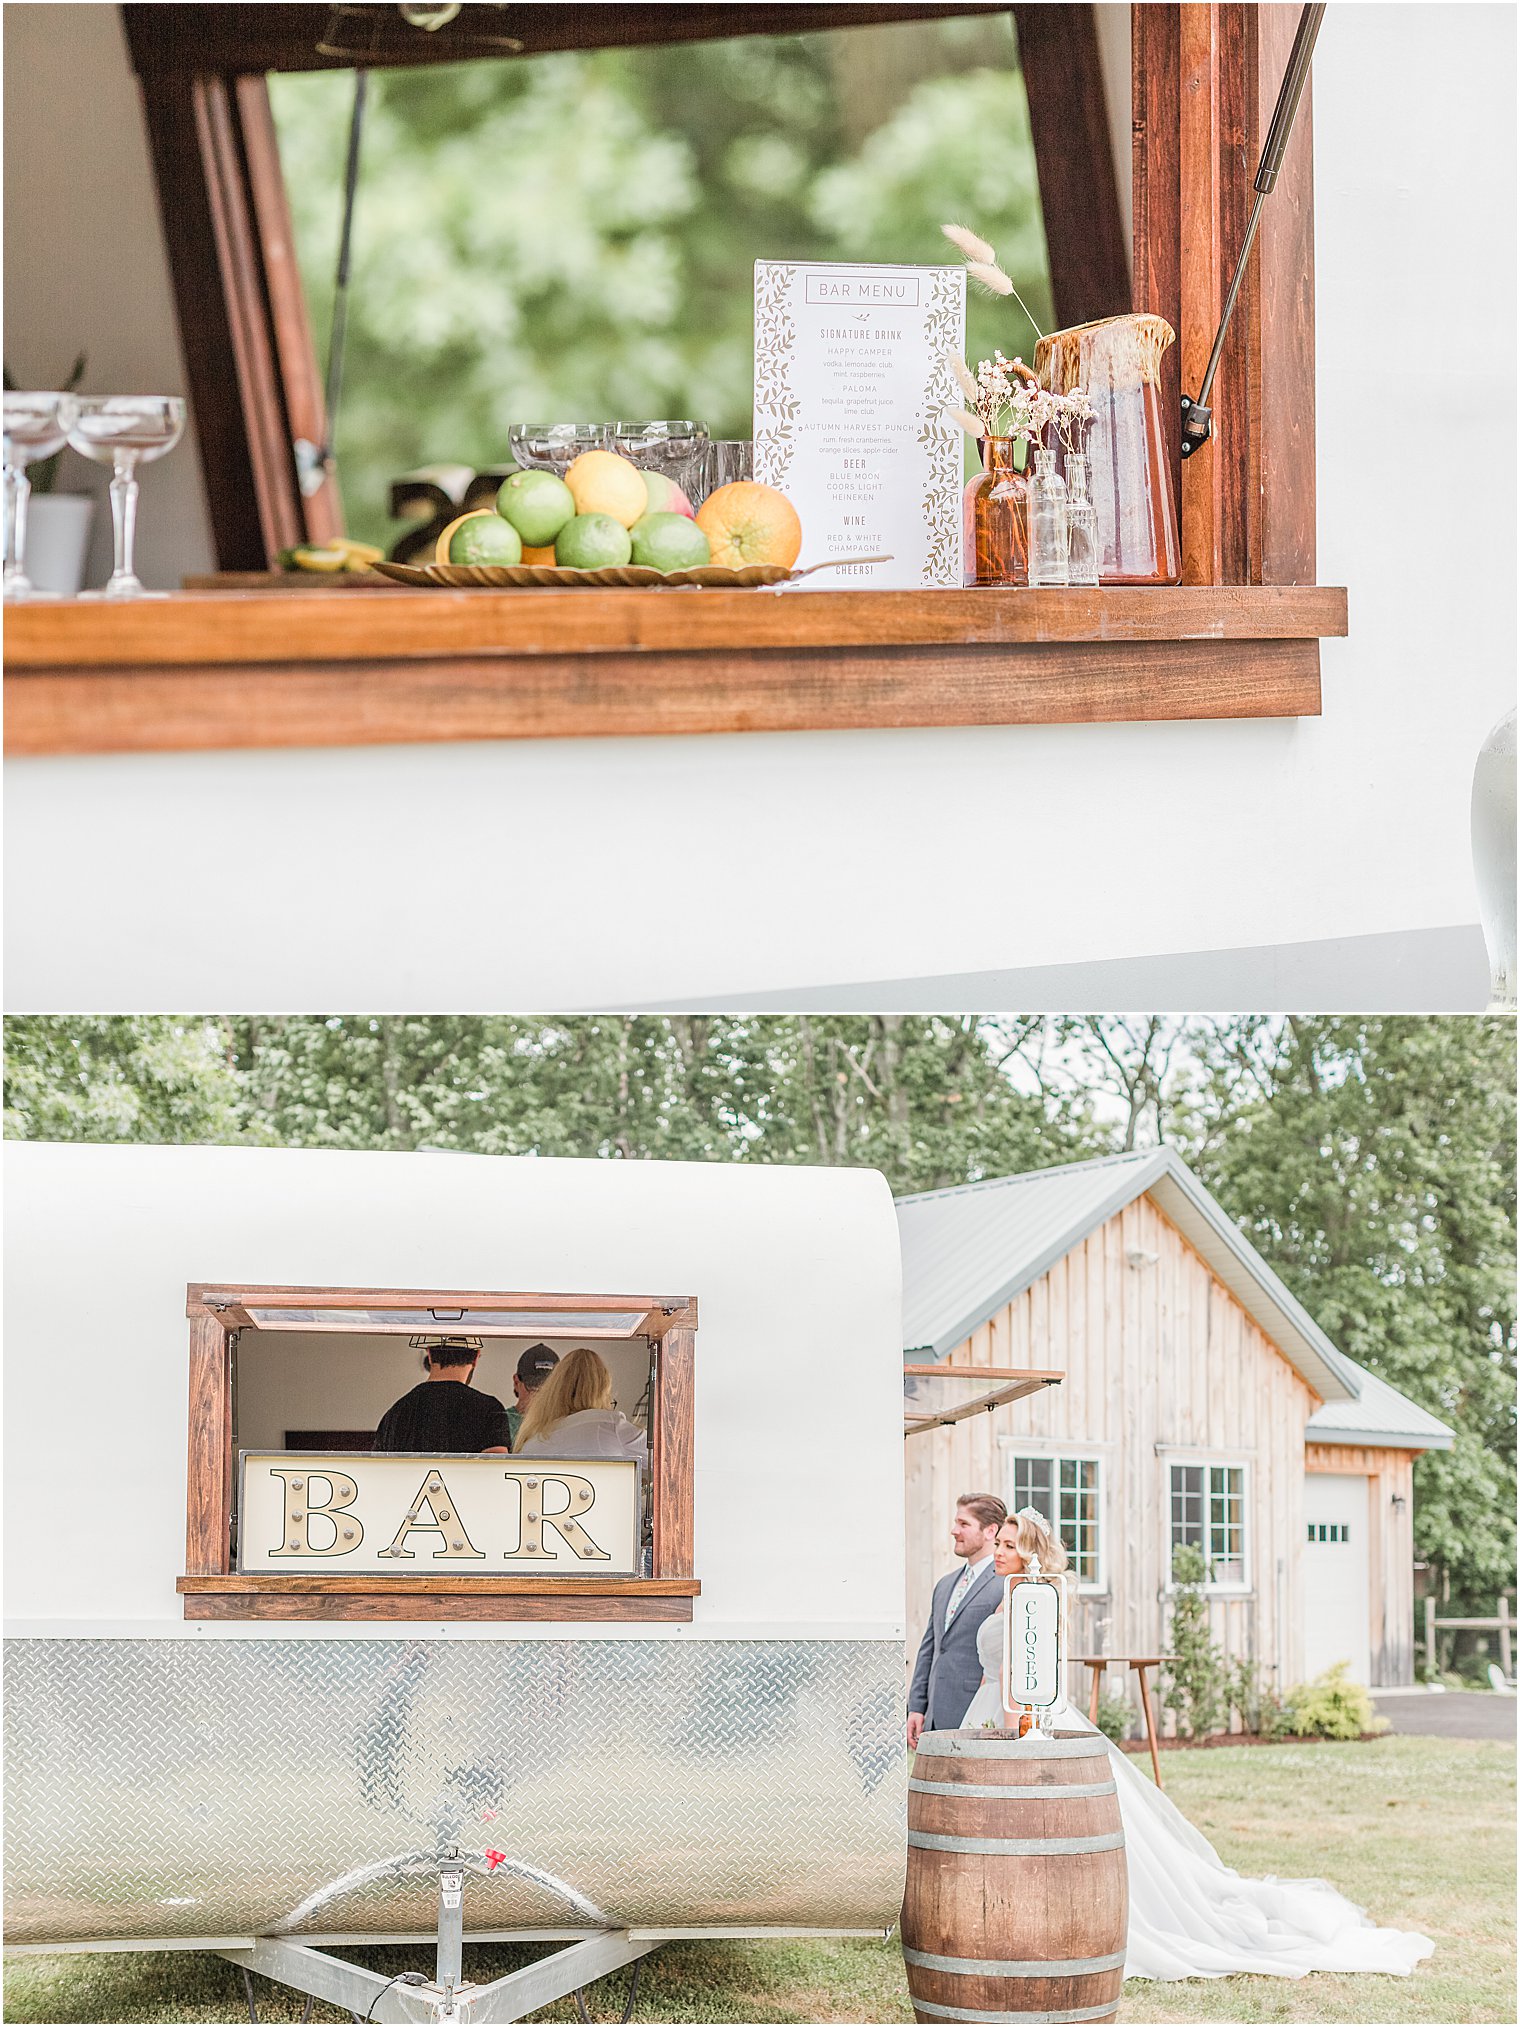 romantic Outdoor wedding details Food truck and bar set up